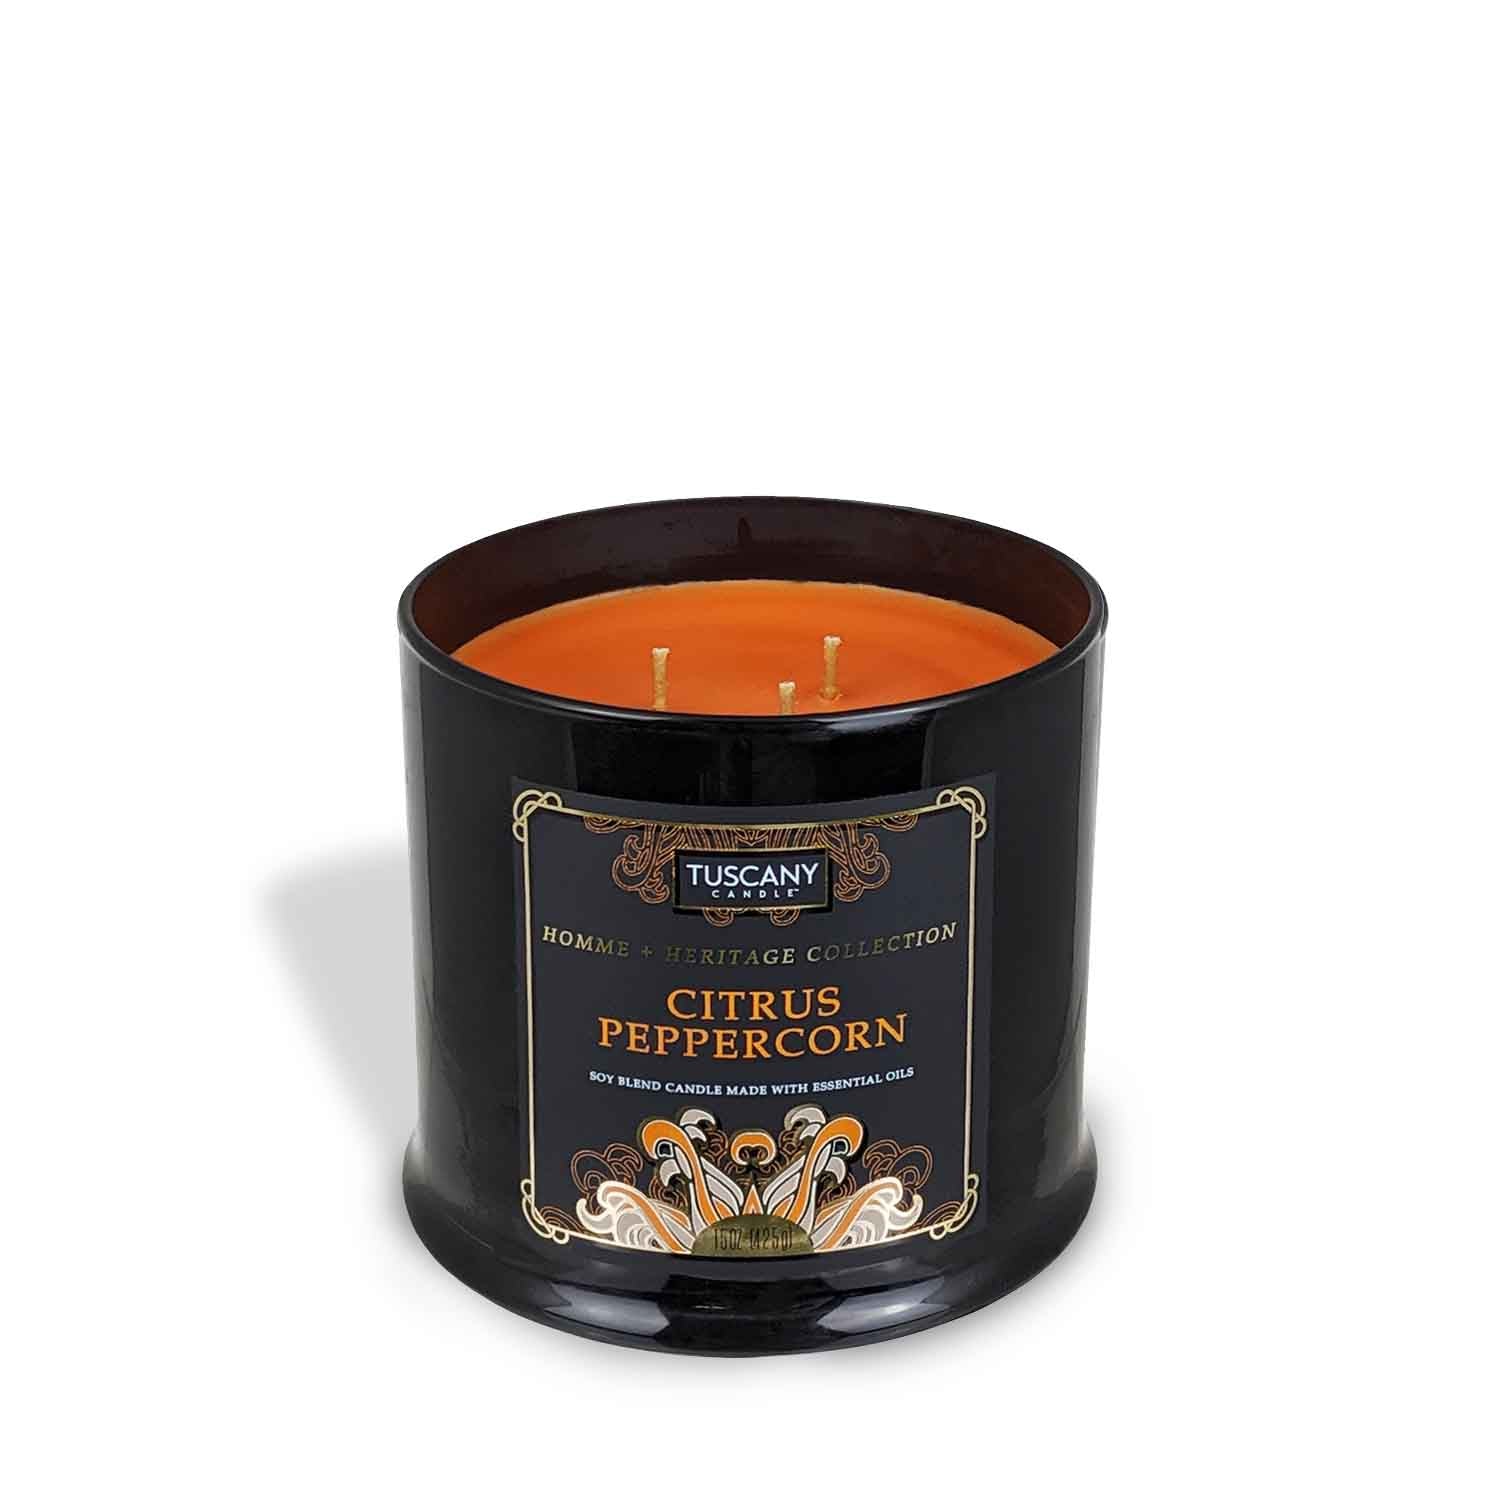 Tuscany Candle's Citrus Peppercorn Scented Jar Candle (15 oz) from the Homme + Heritage Collection.